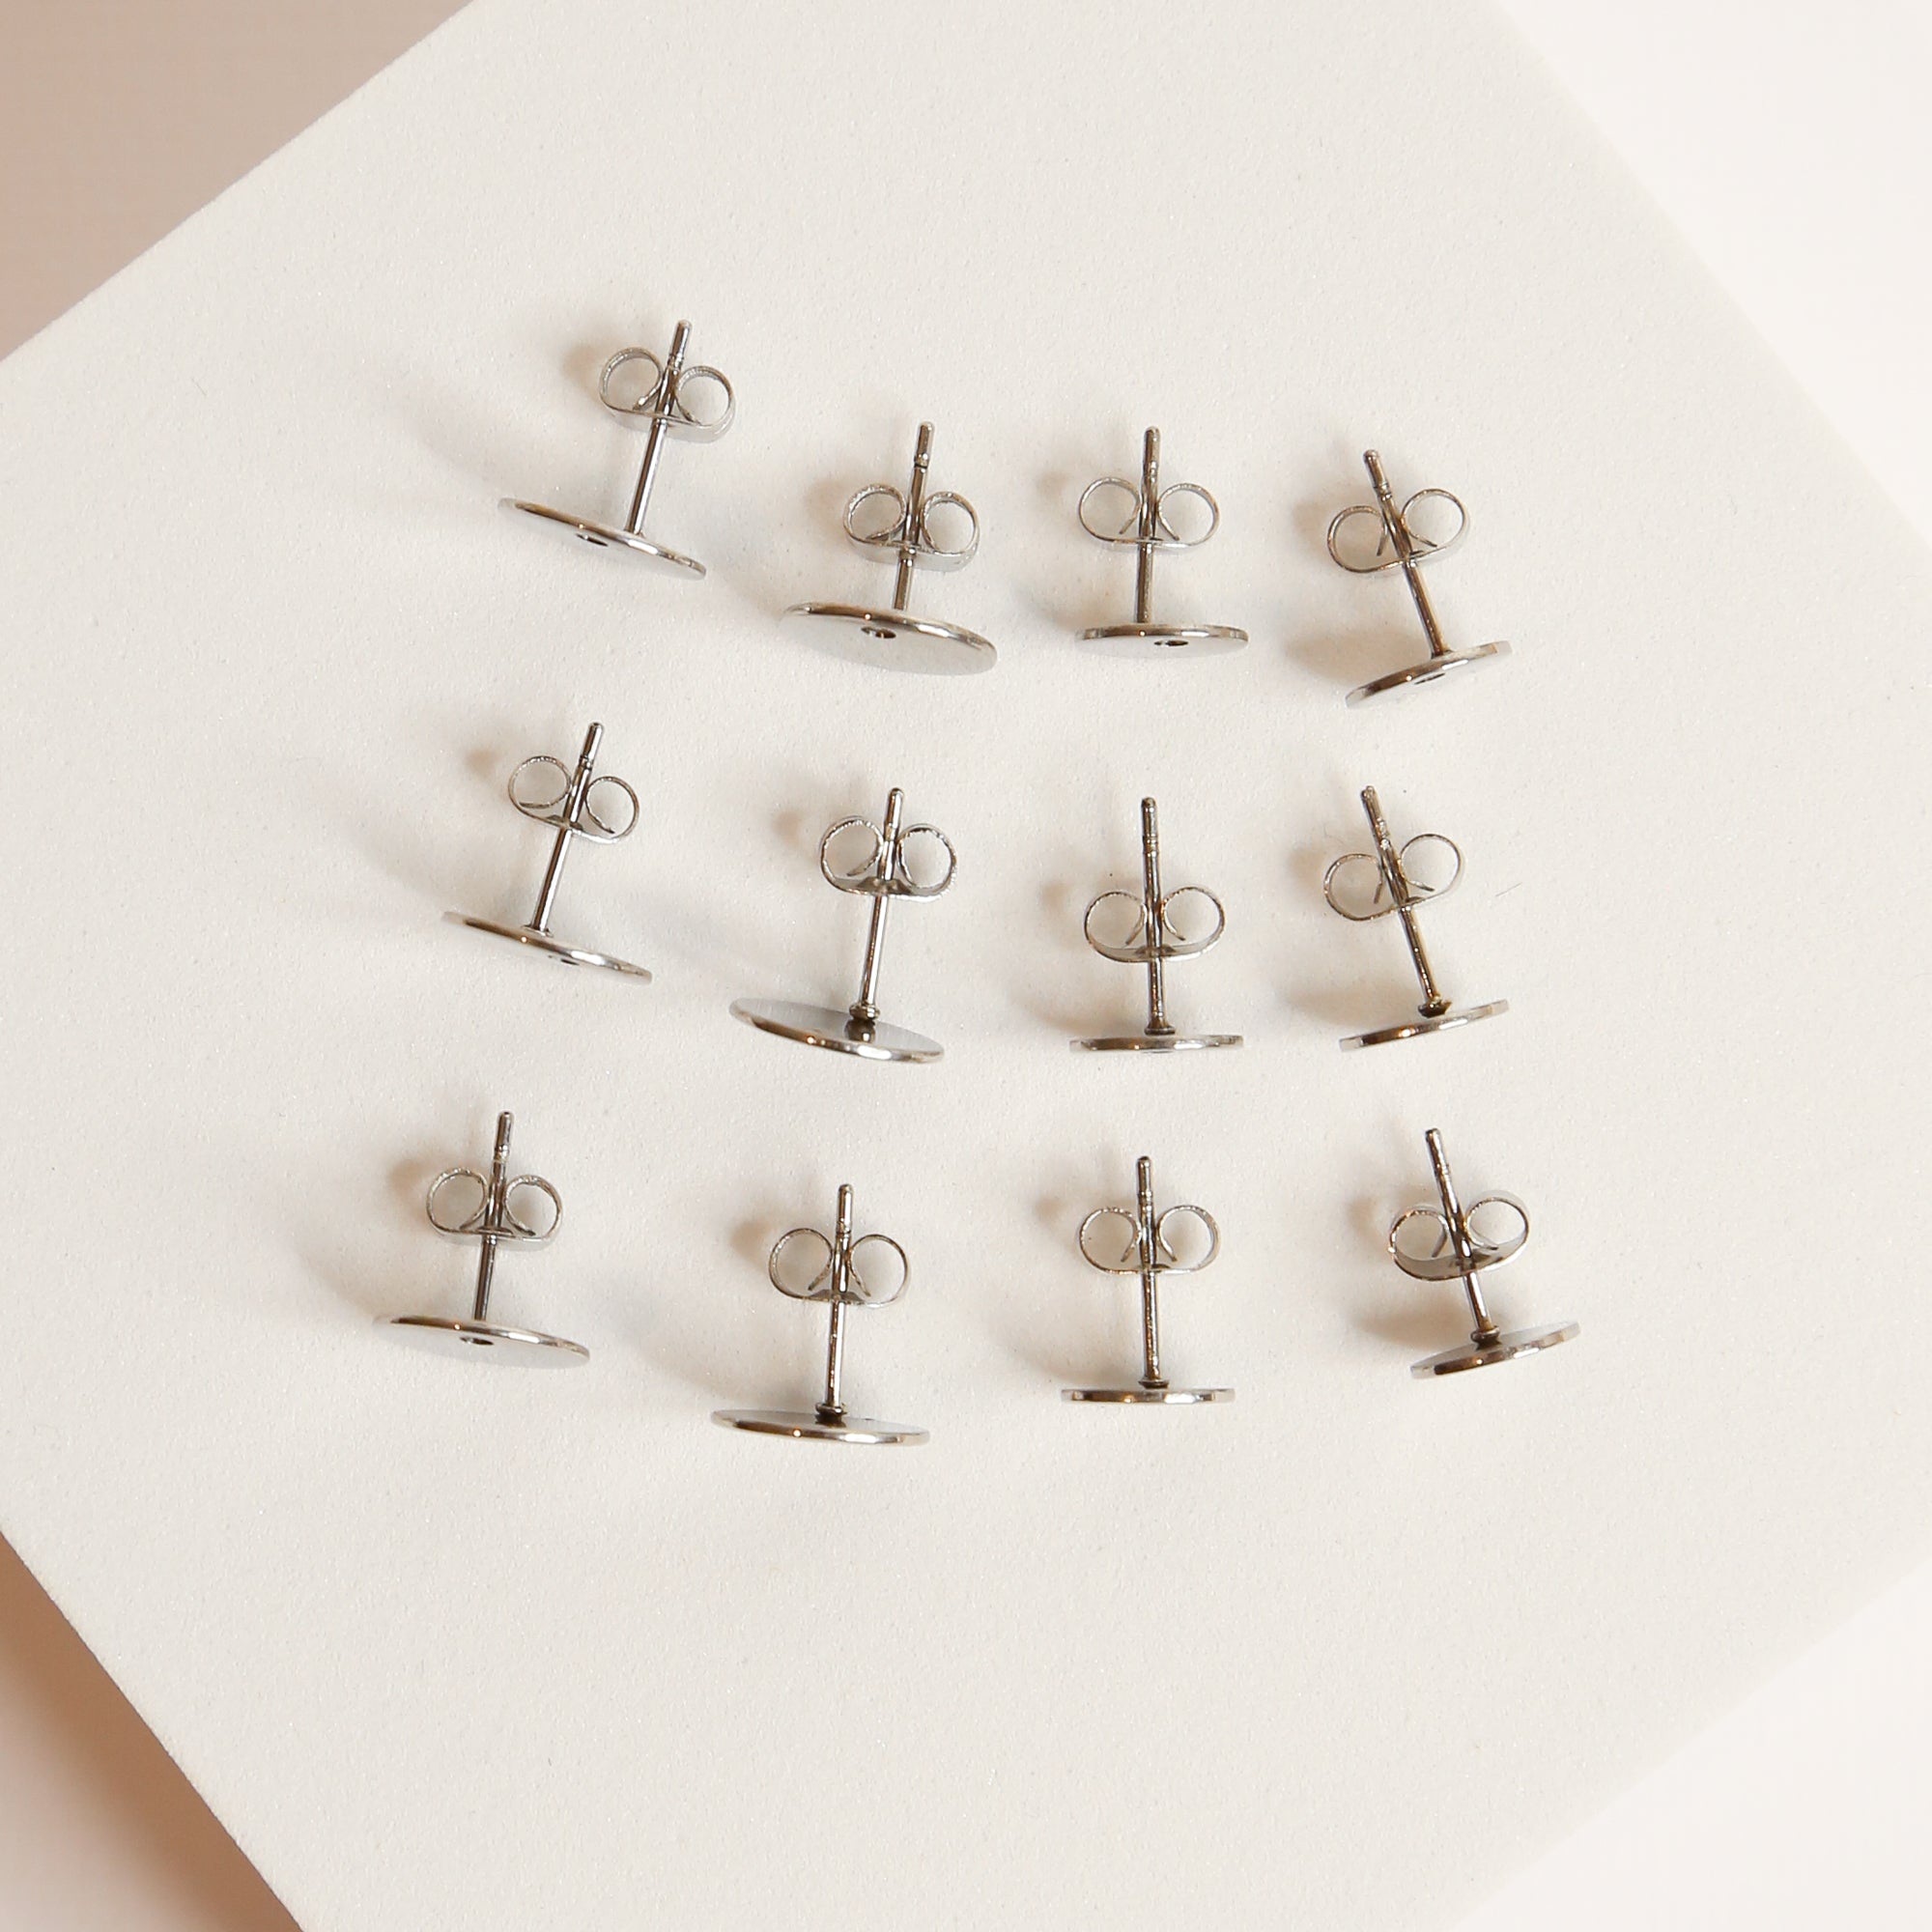 Silver Earring Posts with Studs and Butterfly Backings - set of 10